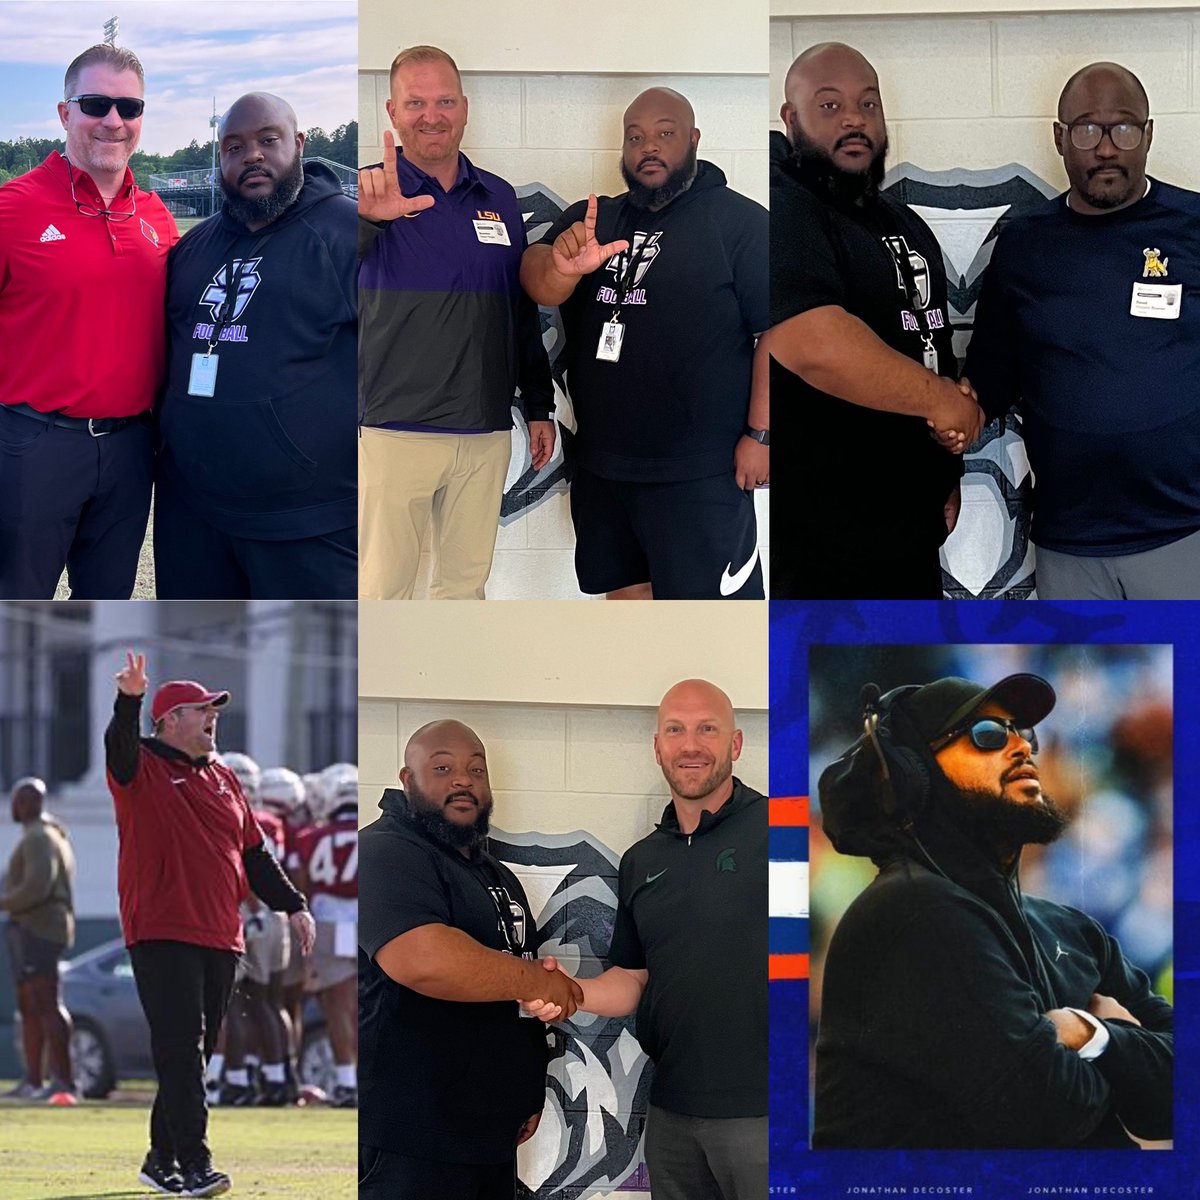 It was a busy recruitment day @SouthGarnerHS today. We were blessed to host 6 different universities today!! Thank you to @ChadWilt from @MSU_Football, @Coach_Nagle from @LSUfootball, @CoachBowser2 from @JCSUFootball, @CoachCKap from @AlabamaFTBL, @ballcoach_d from @GatorsFB and